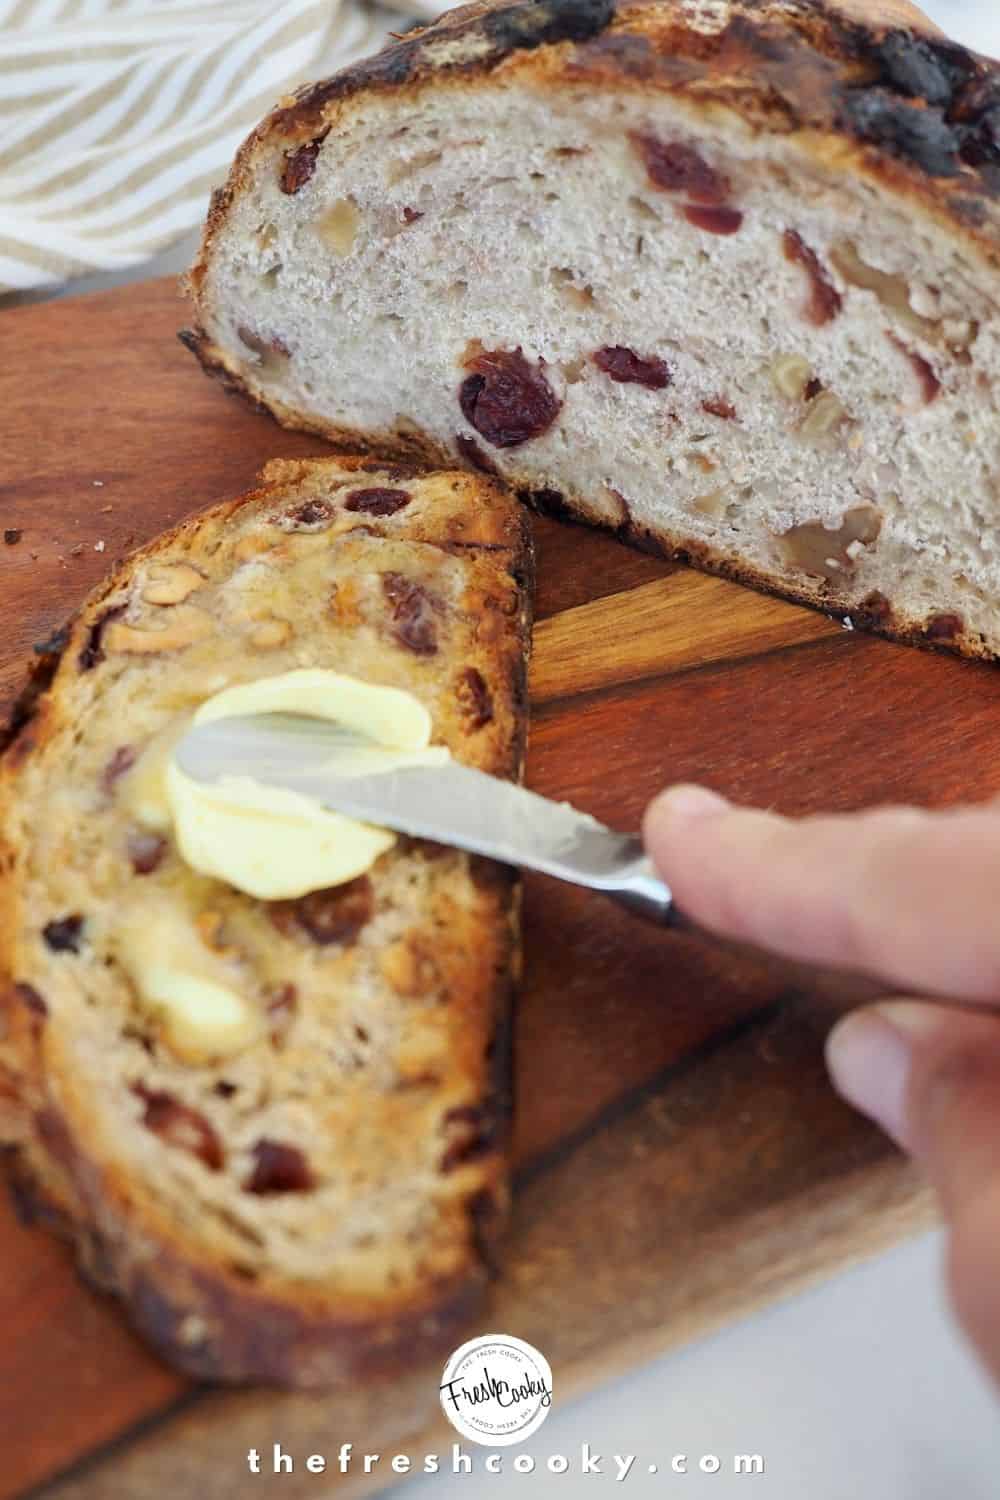 Slice of cranberry nut bread toasted, with hand buttering the slice and loaf in background.